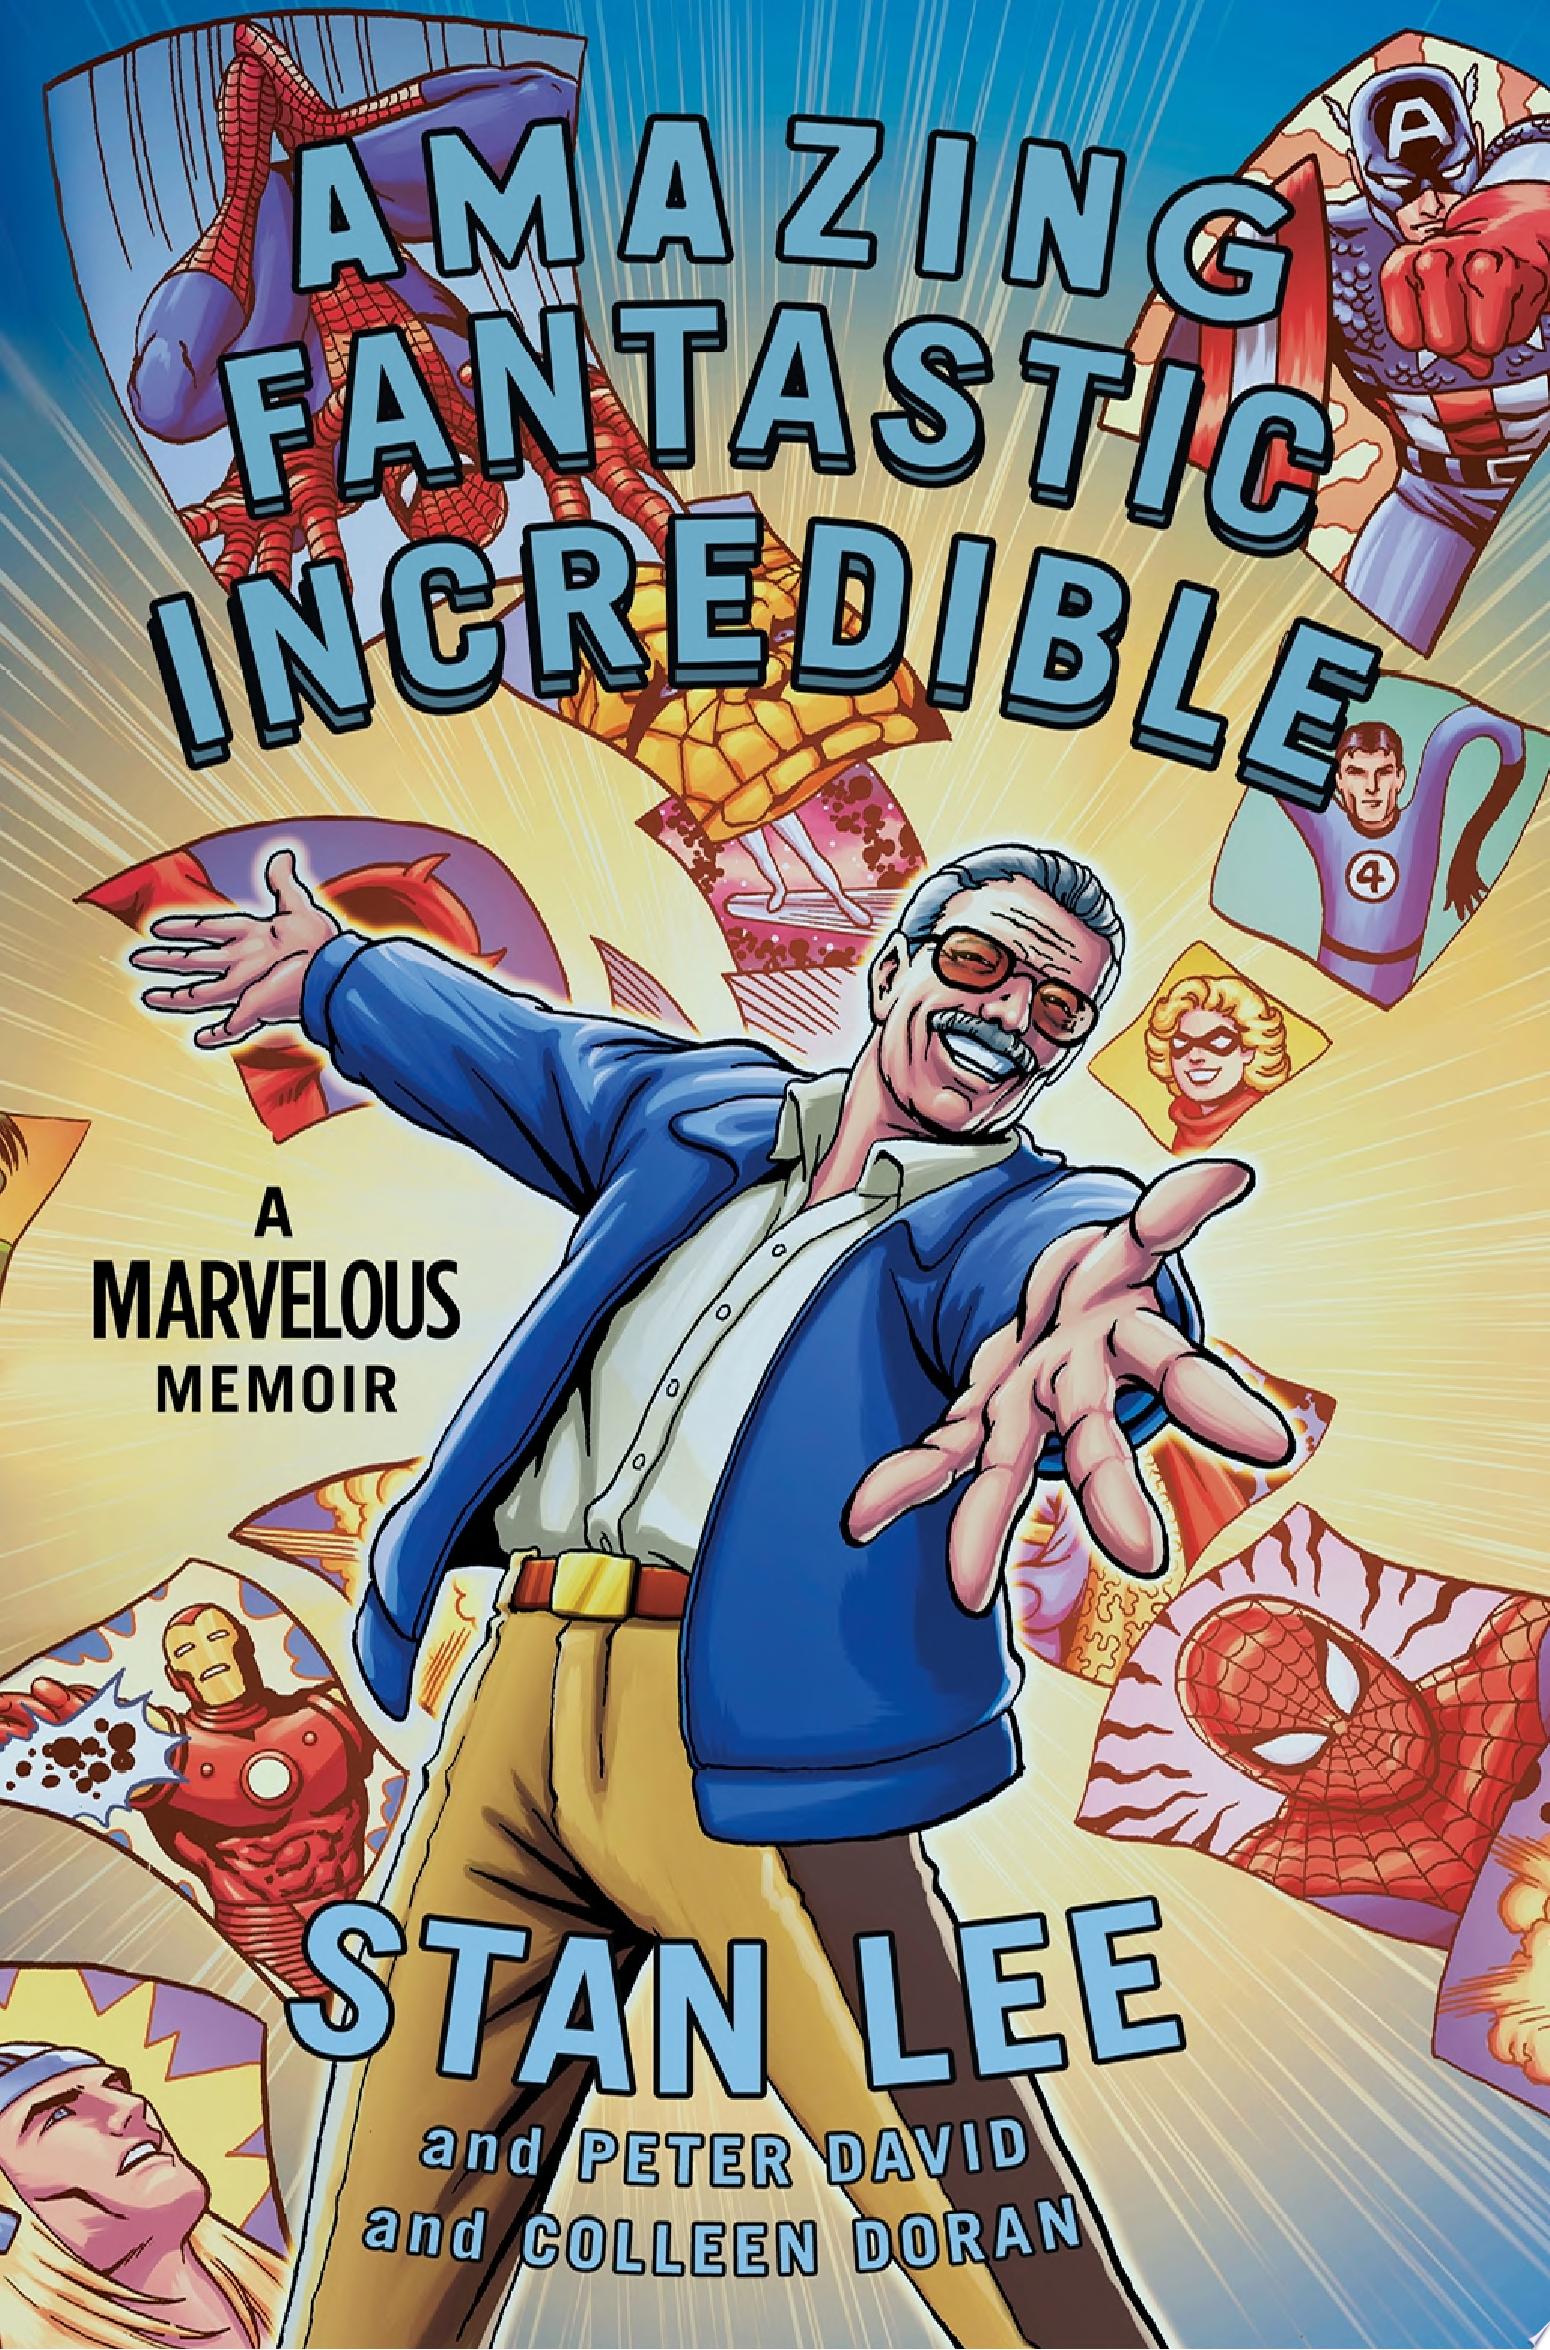 Image for "Amazing Fantastic Incredible"